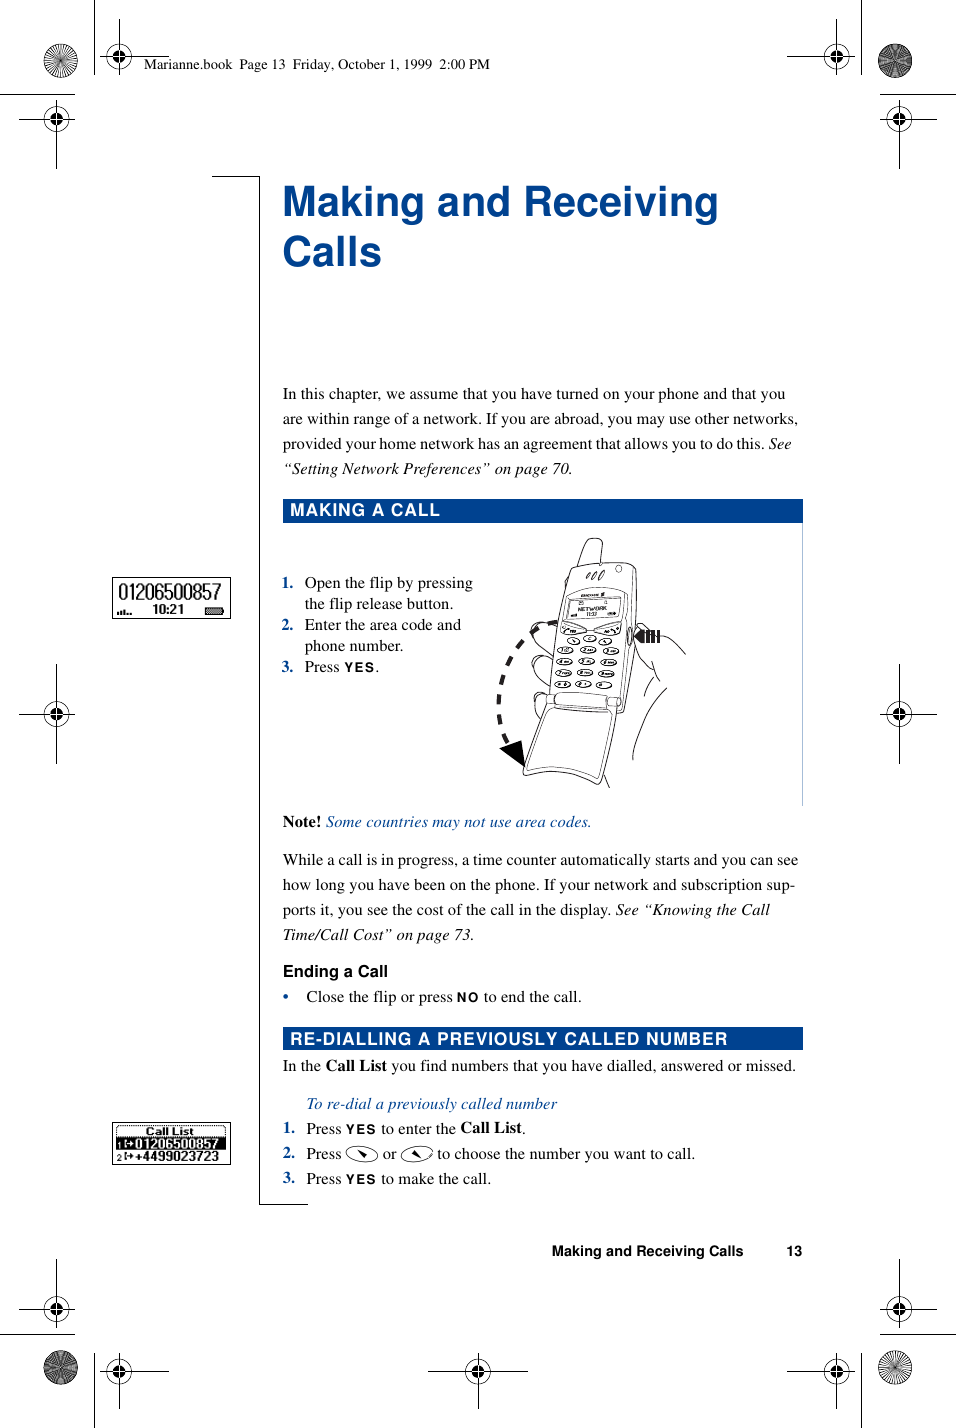 Making and Receiving Calls 13Making and Receiving CallsIn this chapter, we assume that you have turned on your phone and that you are within range of a network. If you are abroad, you may use other networks, provided your home network has an agreement that allows you to do this. See   “Setting Network Preferences” on page 70.Note! Some countries may not use area codes. While a call is in progress, a time counter automatically starts and you can see how long you have been on the phone. If your network and subscription sup-ports it, you see the cost of the call in the display. See “Knowing the Call Time/Call Cost” on page 73.Ending a Call•Close the flip or press NO to end the call.In the Call List you find numbers that you have dialled, answered or missed.To re-dial a previously called number1. Press YES to enter the Call List.2. Press ç or é to choose the number you want to call.3. Press YES to make the call.MAKING A CALLRE-DIALLING A PREVIOUSLY CALLED NUMBER1.Open the flip by pressing the flip release button.2.Enter the area code and phone number.3.Press YES.Marianne.book  Page 13  Friday, October 1, 1999  2:00 PM